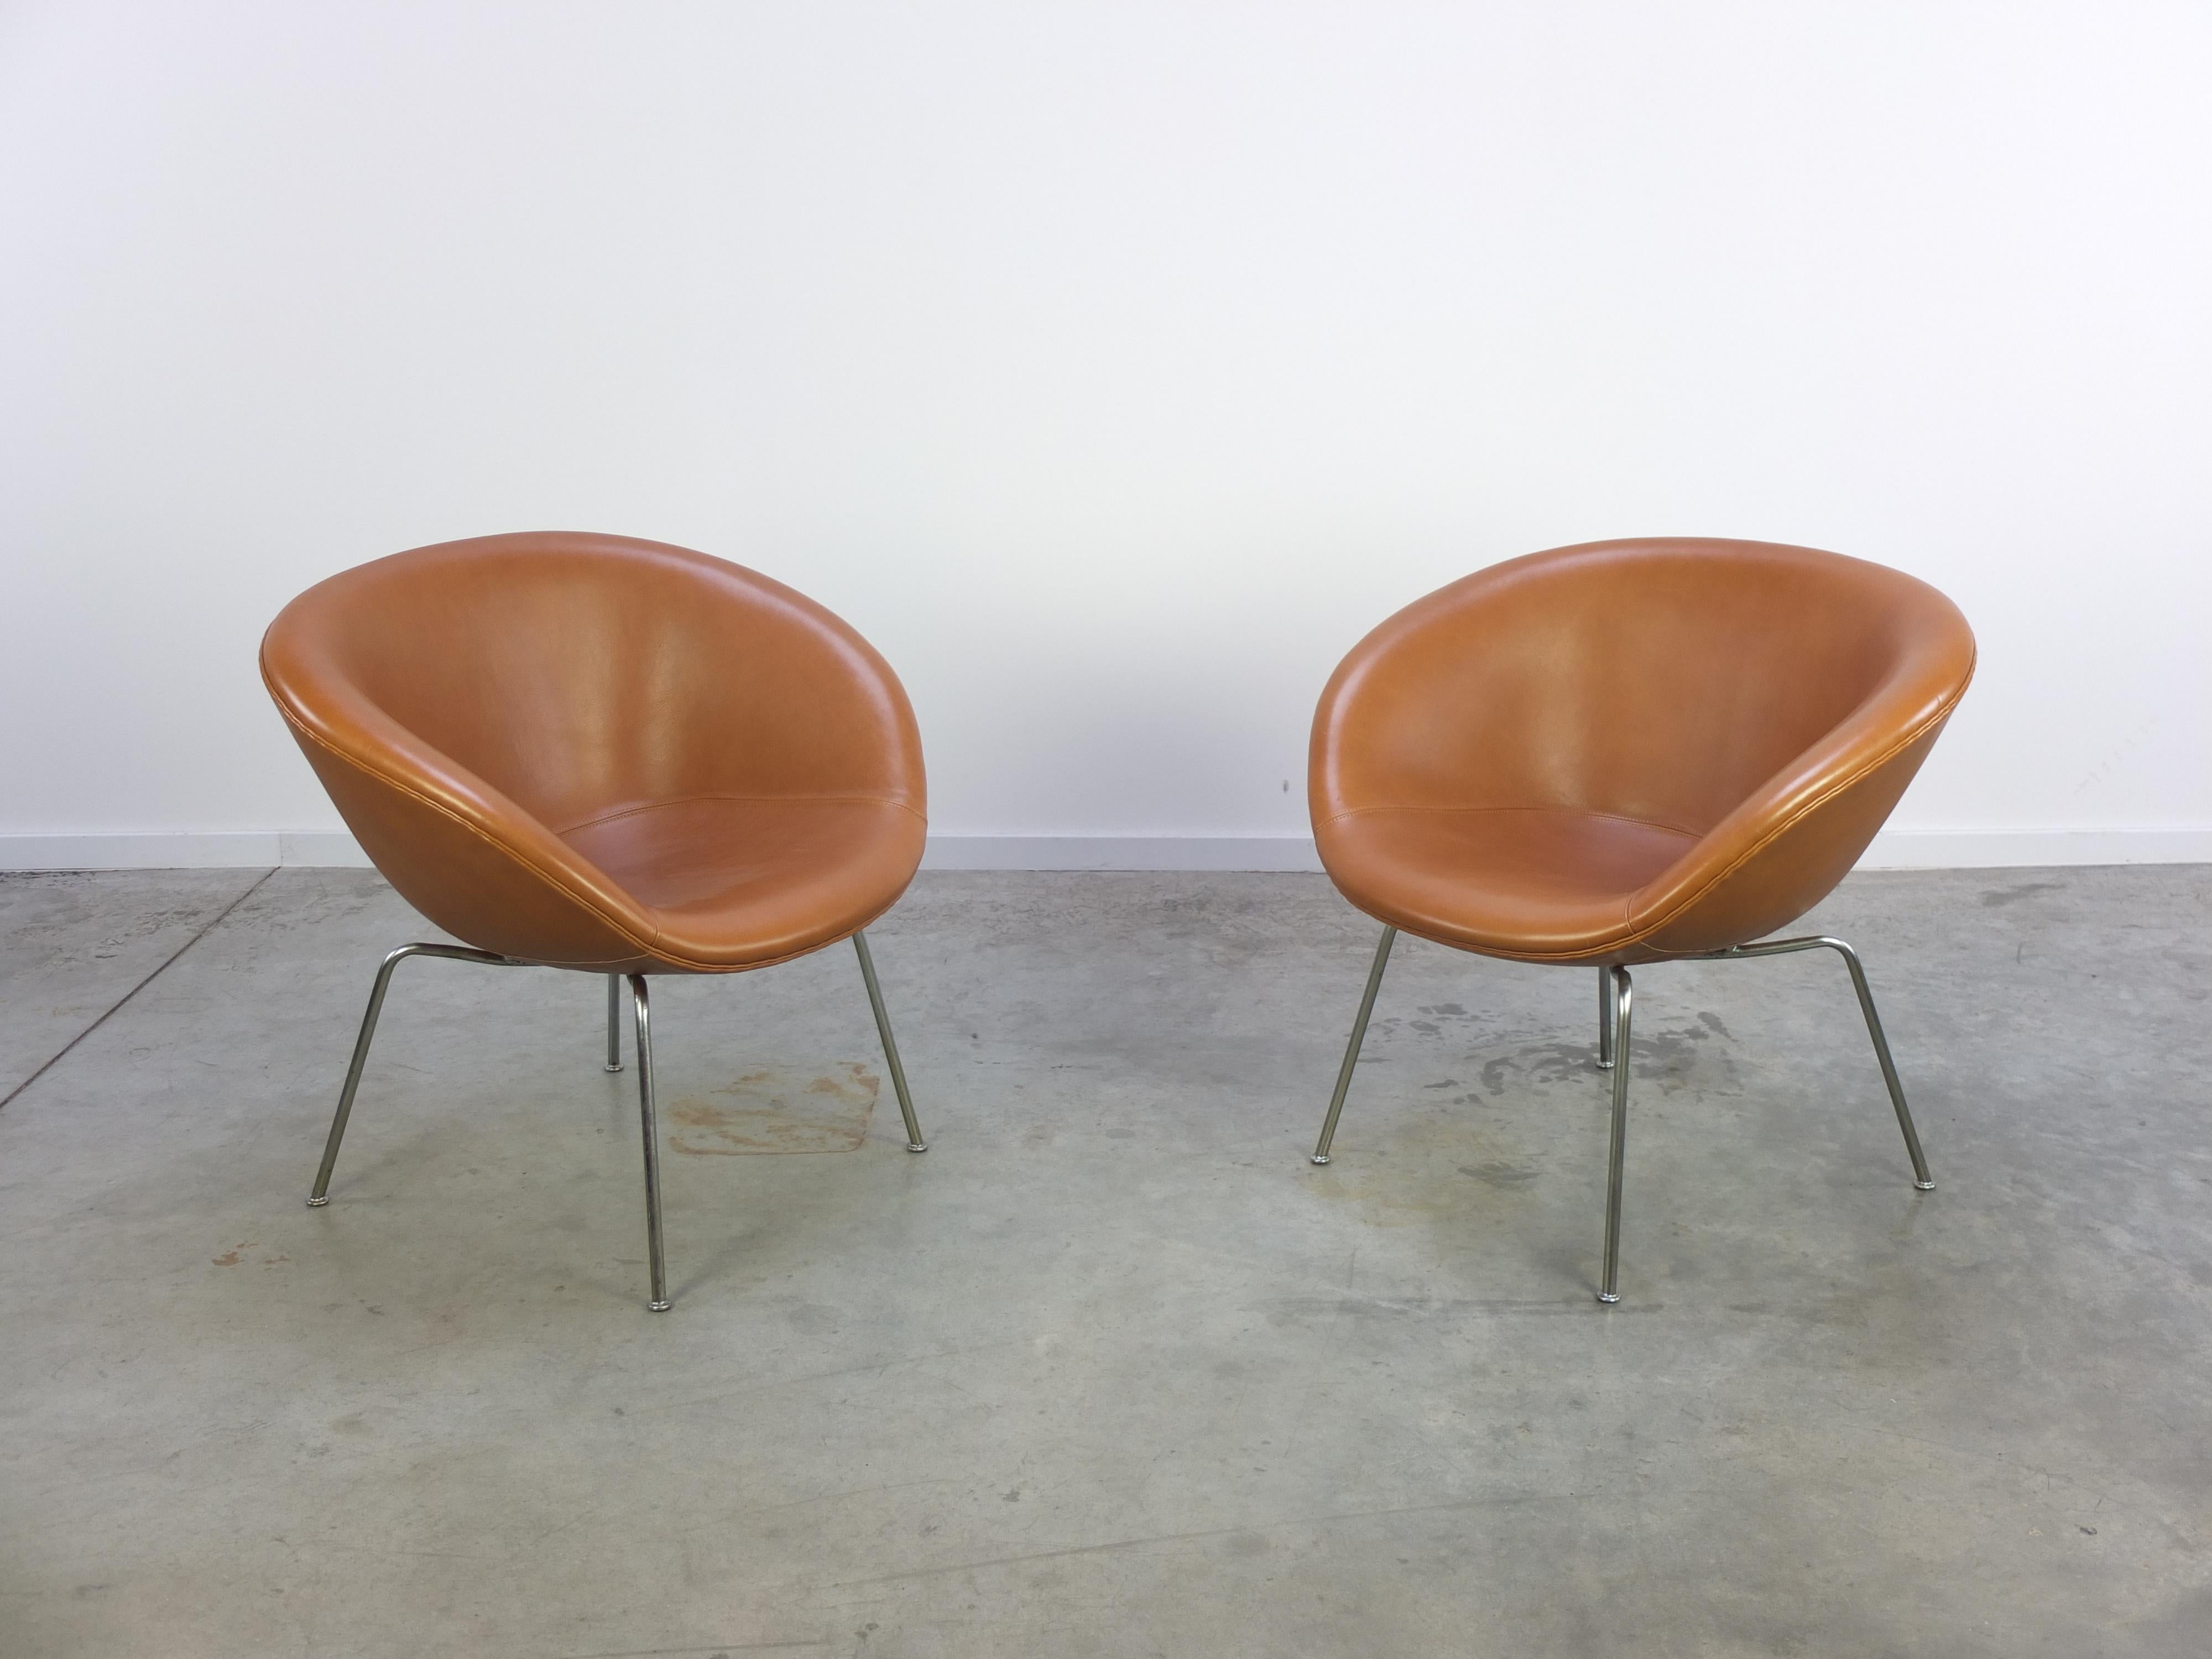 Scandinavian Modern Early Pair of 'Pot' Lounge Chairs by Arne Jacobsen for Fritz Hansen, 1950s For Sale